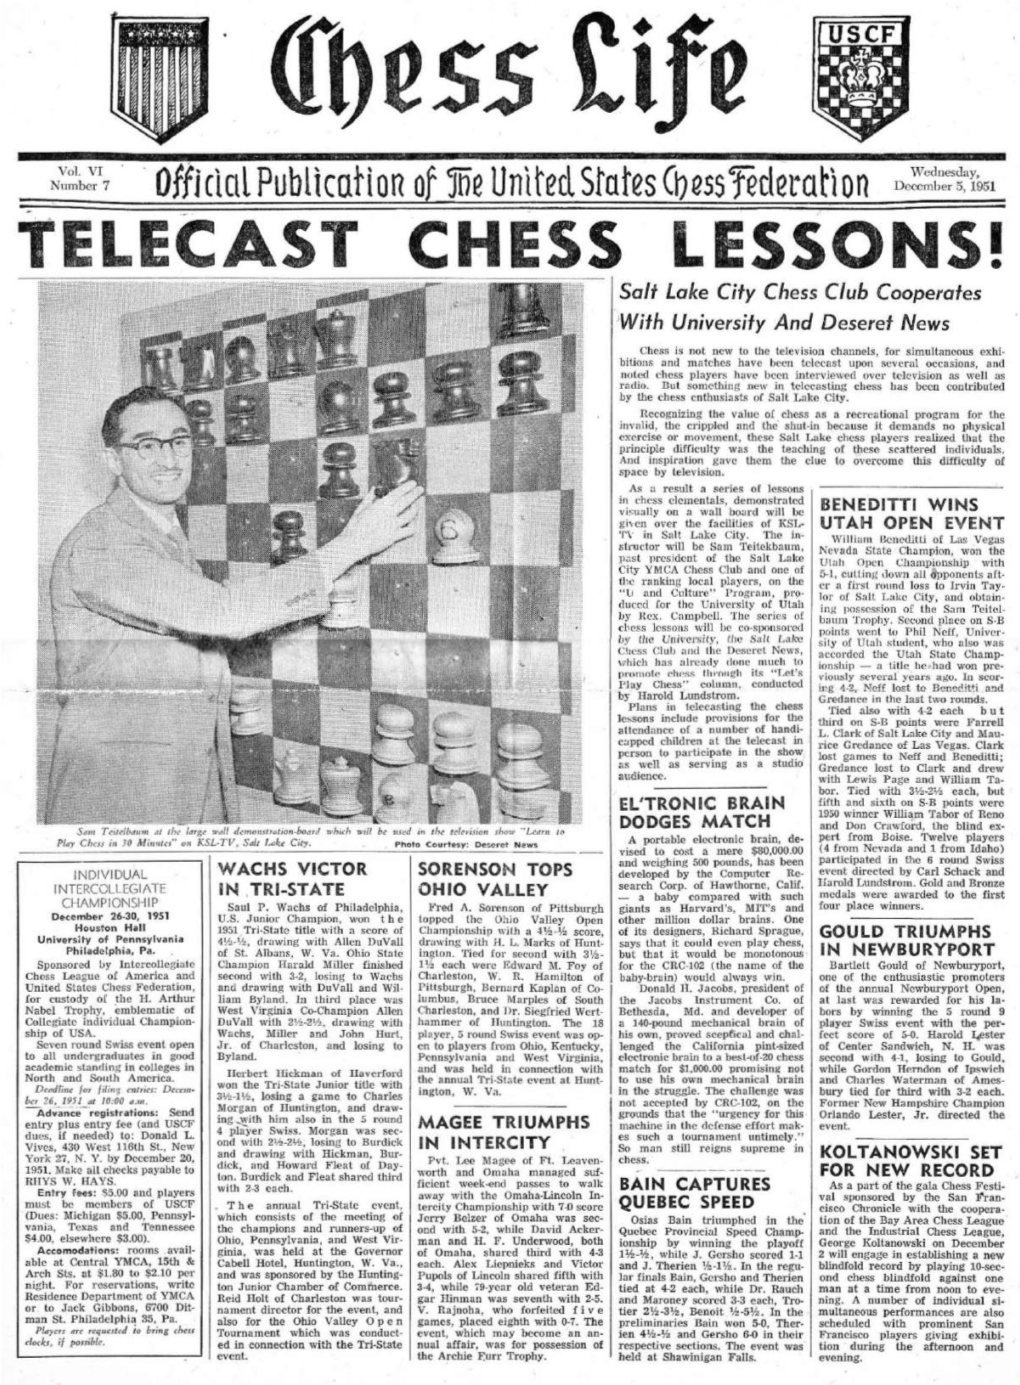 Telecast Chess Lessons!